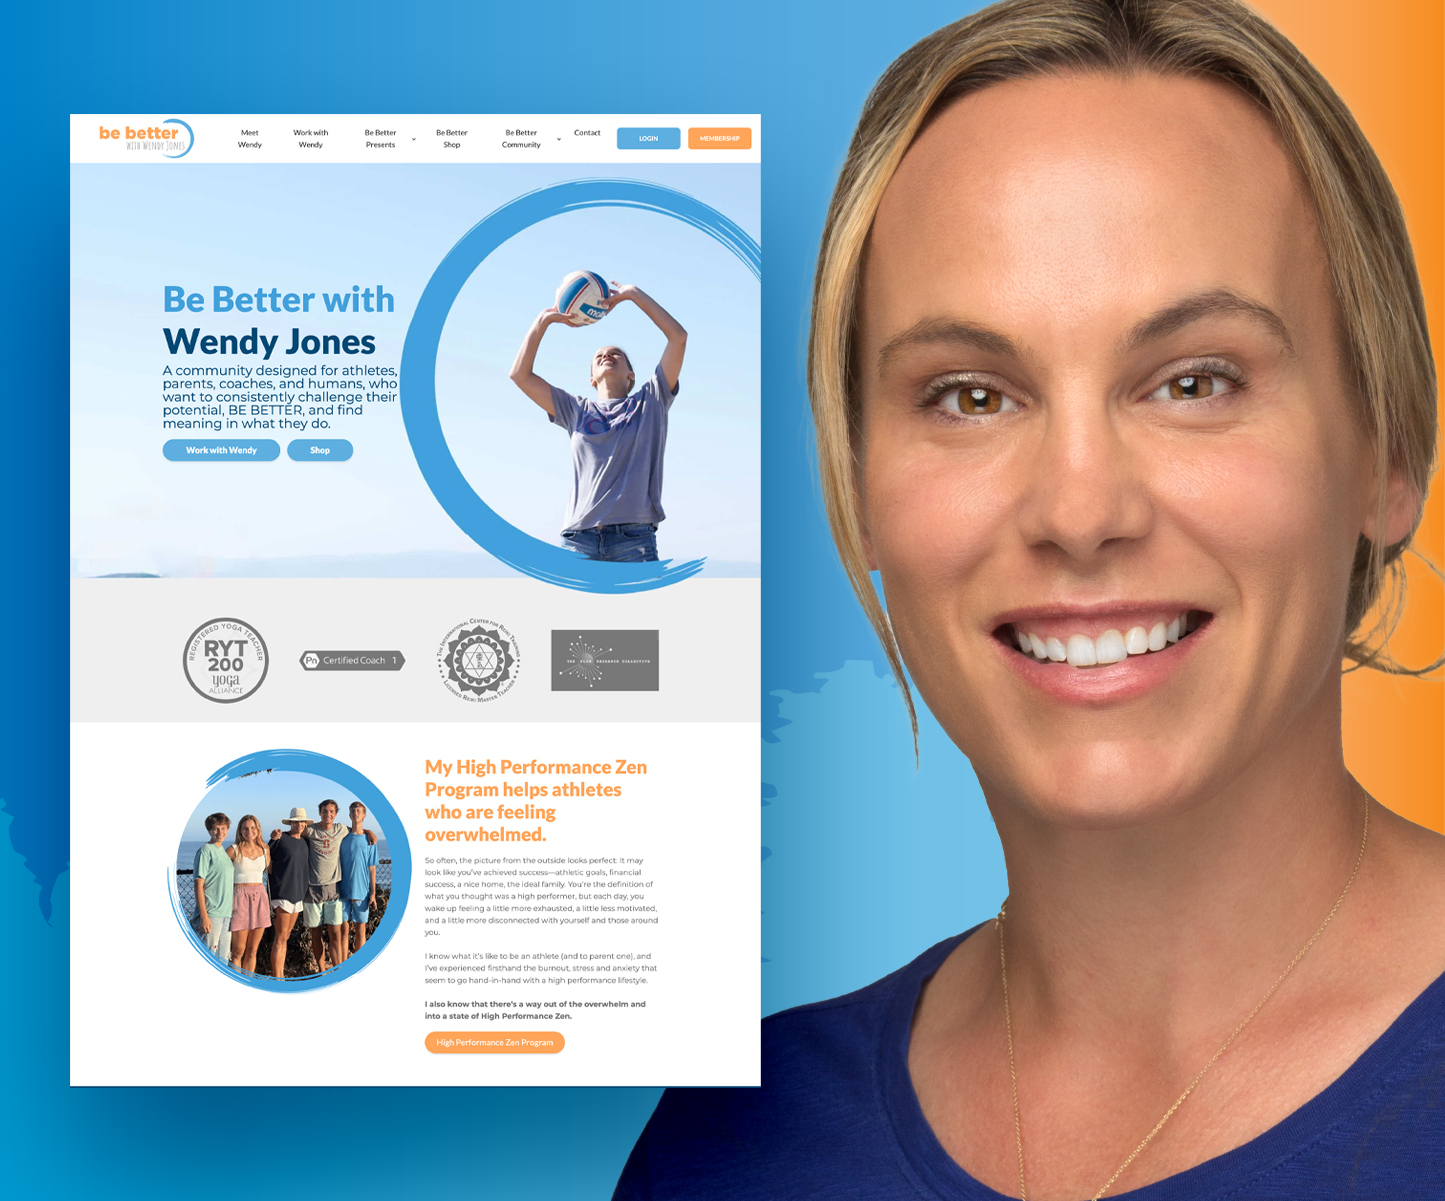 Author and Coach Wendy Jones Launches Wellness Platform "Be Better with Wendy Jones"